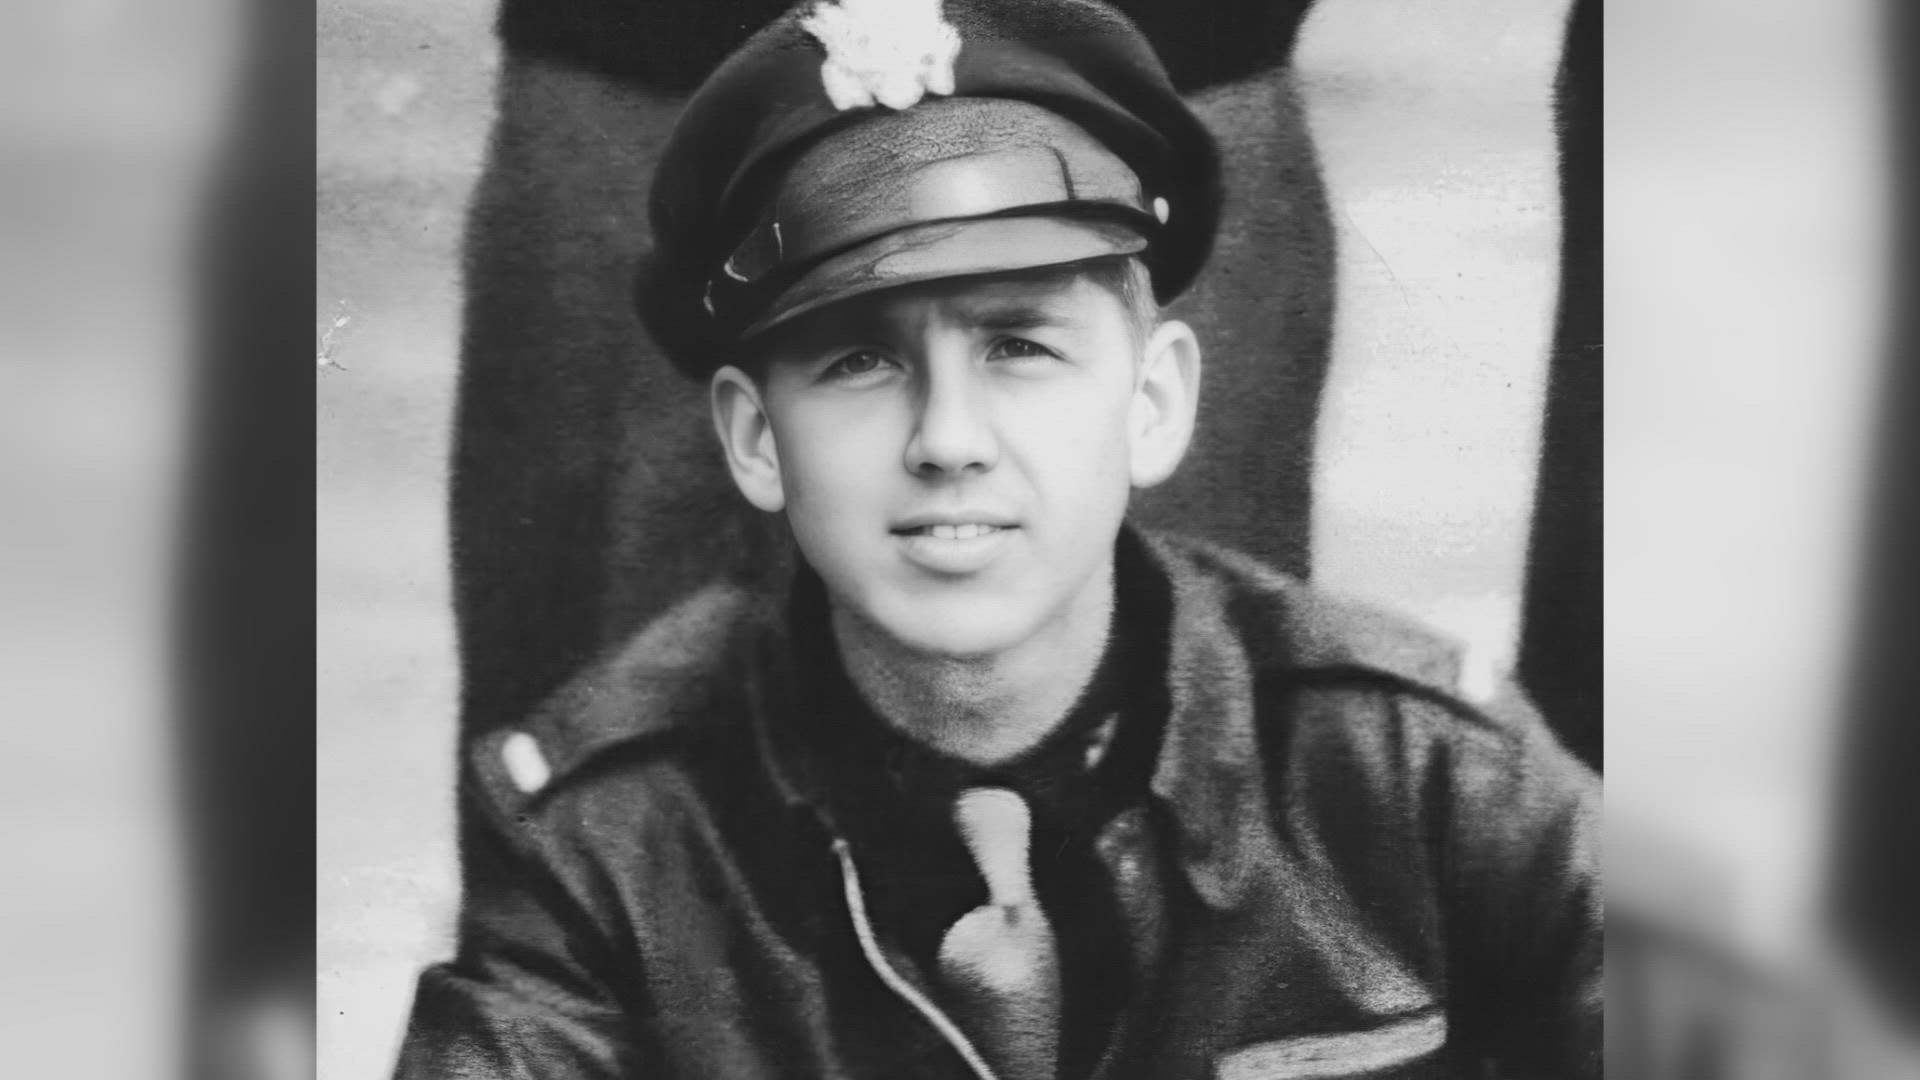 First Lieutenant Melvin B. Meyer, 25, joined the 309th Bombardment Group in 1944. He was from Pattonville, Missouri.